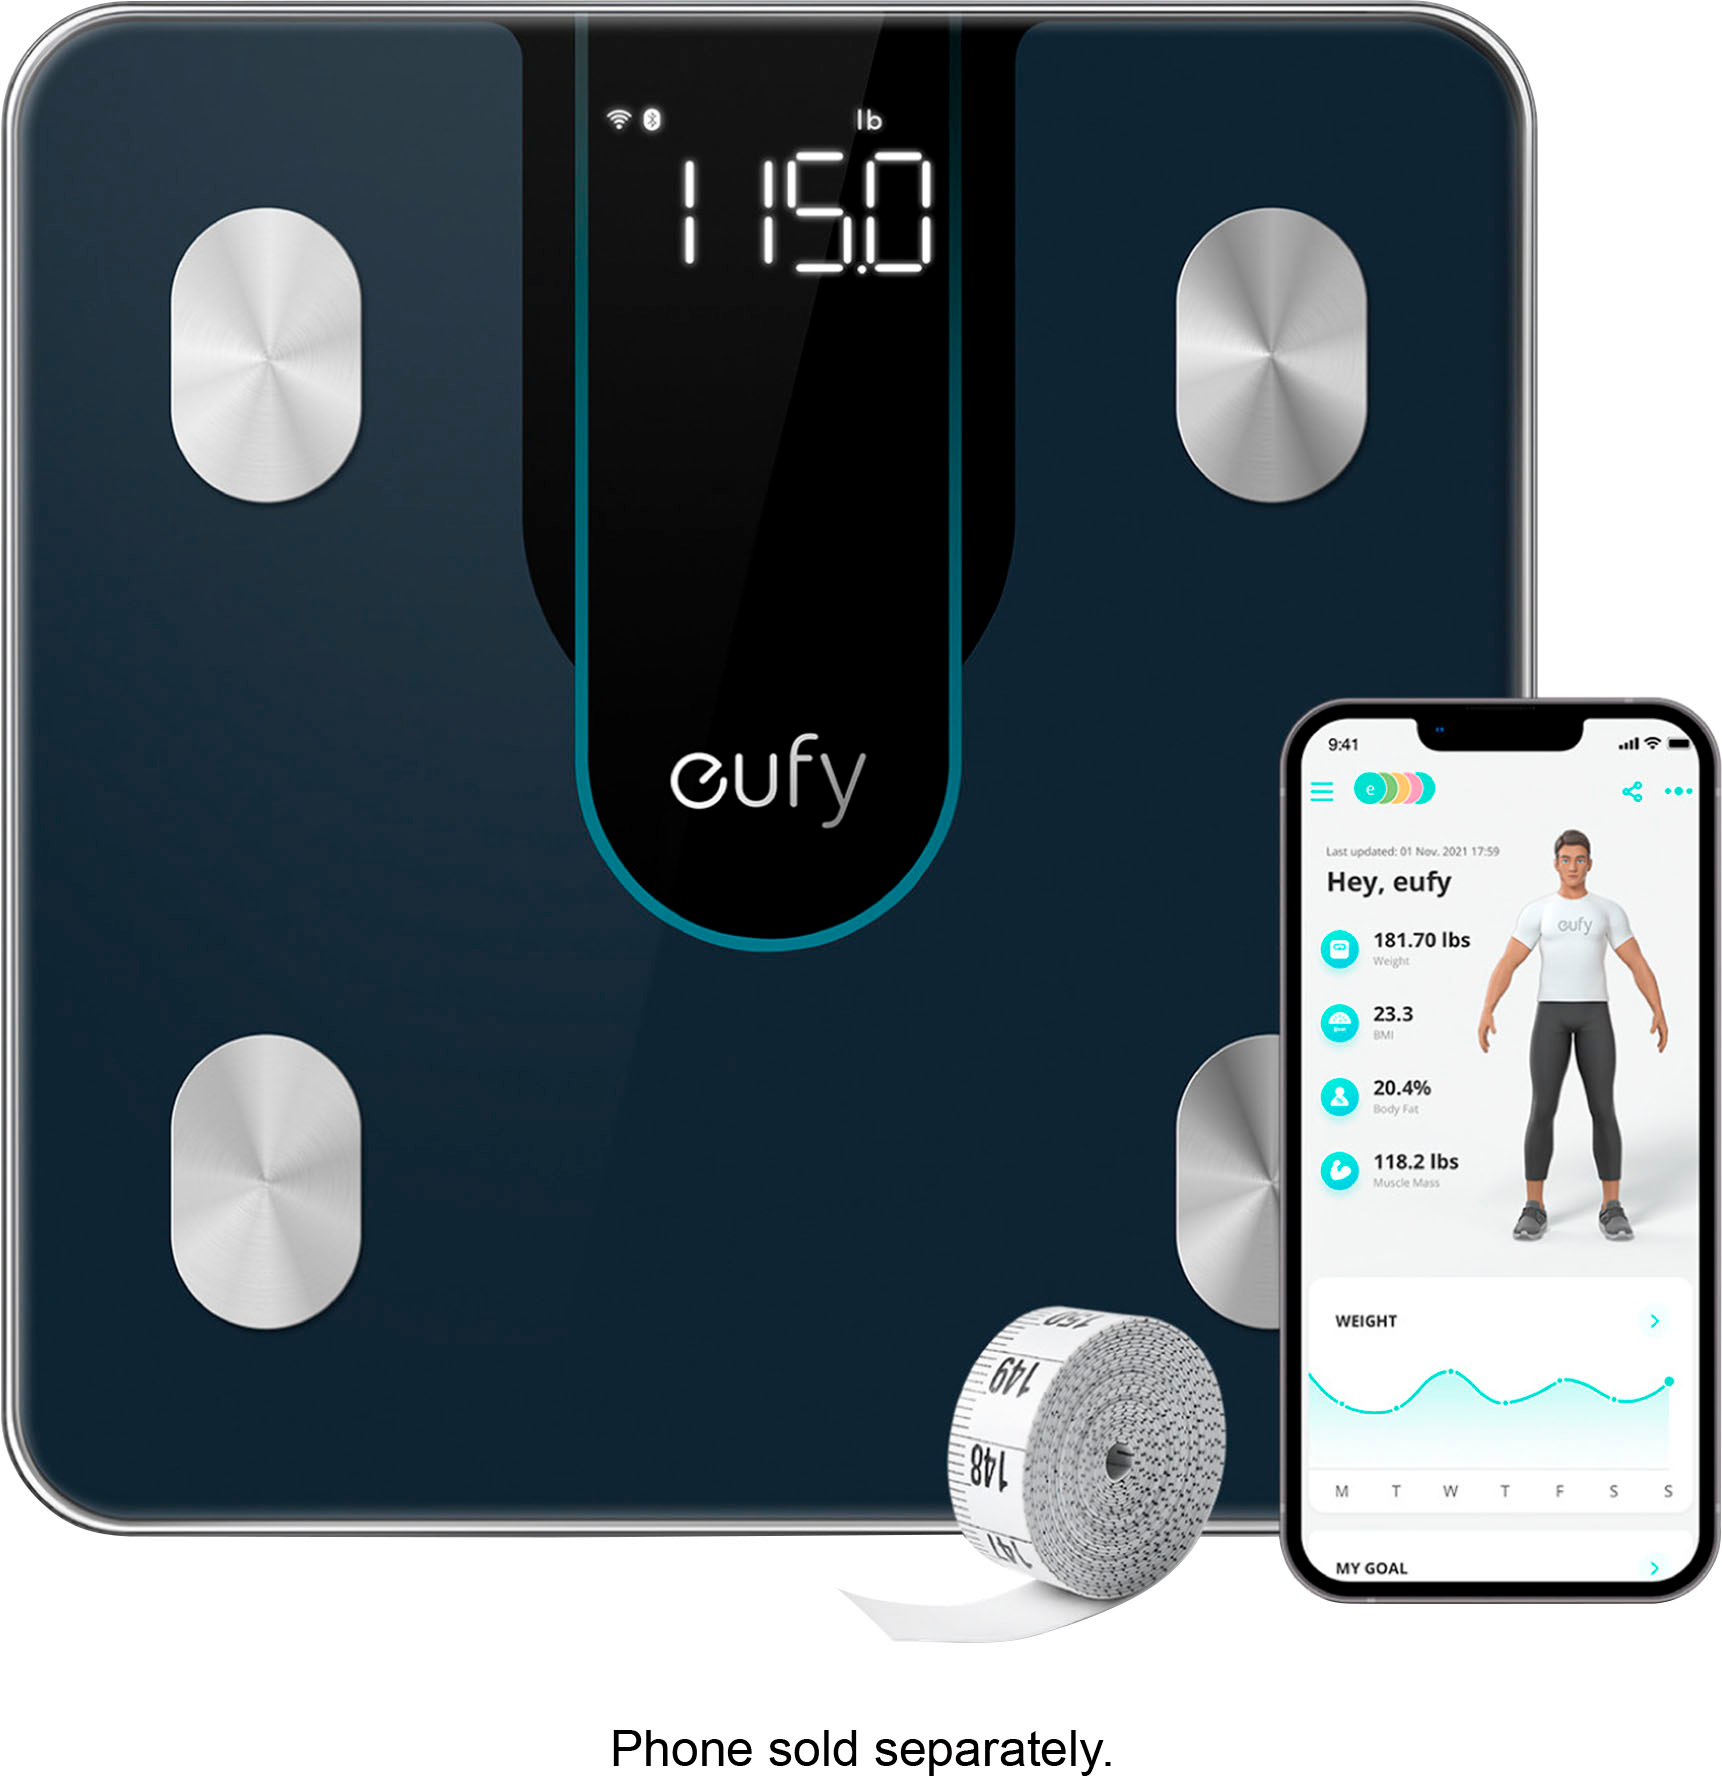 Left View: eufy Smart Scale P2, Digital Bathroom Scale with Wi-Fi, Bluetooth